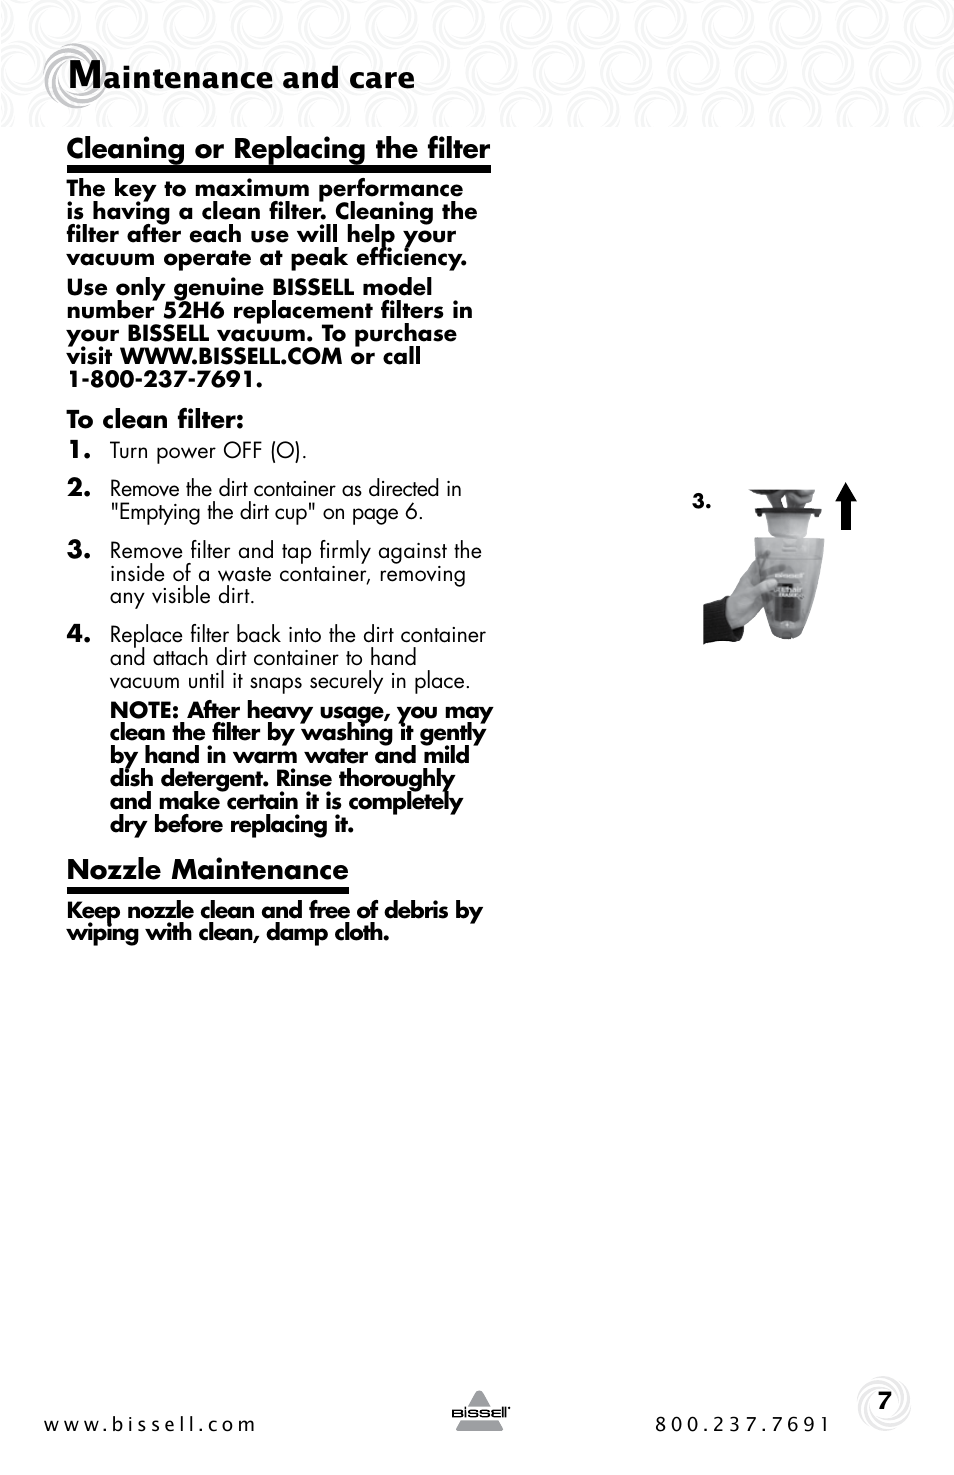 Aintenance and care, Cleaning or replacing the filter, Nozzle maintenance | Bissell 94V5 User Manual | Page 7 / 12